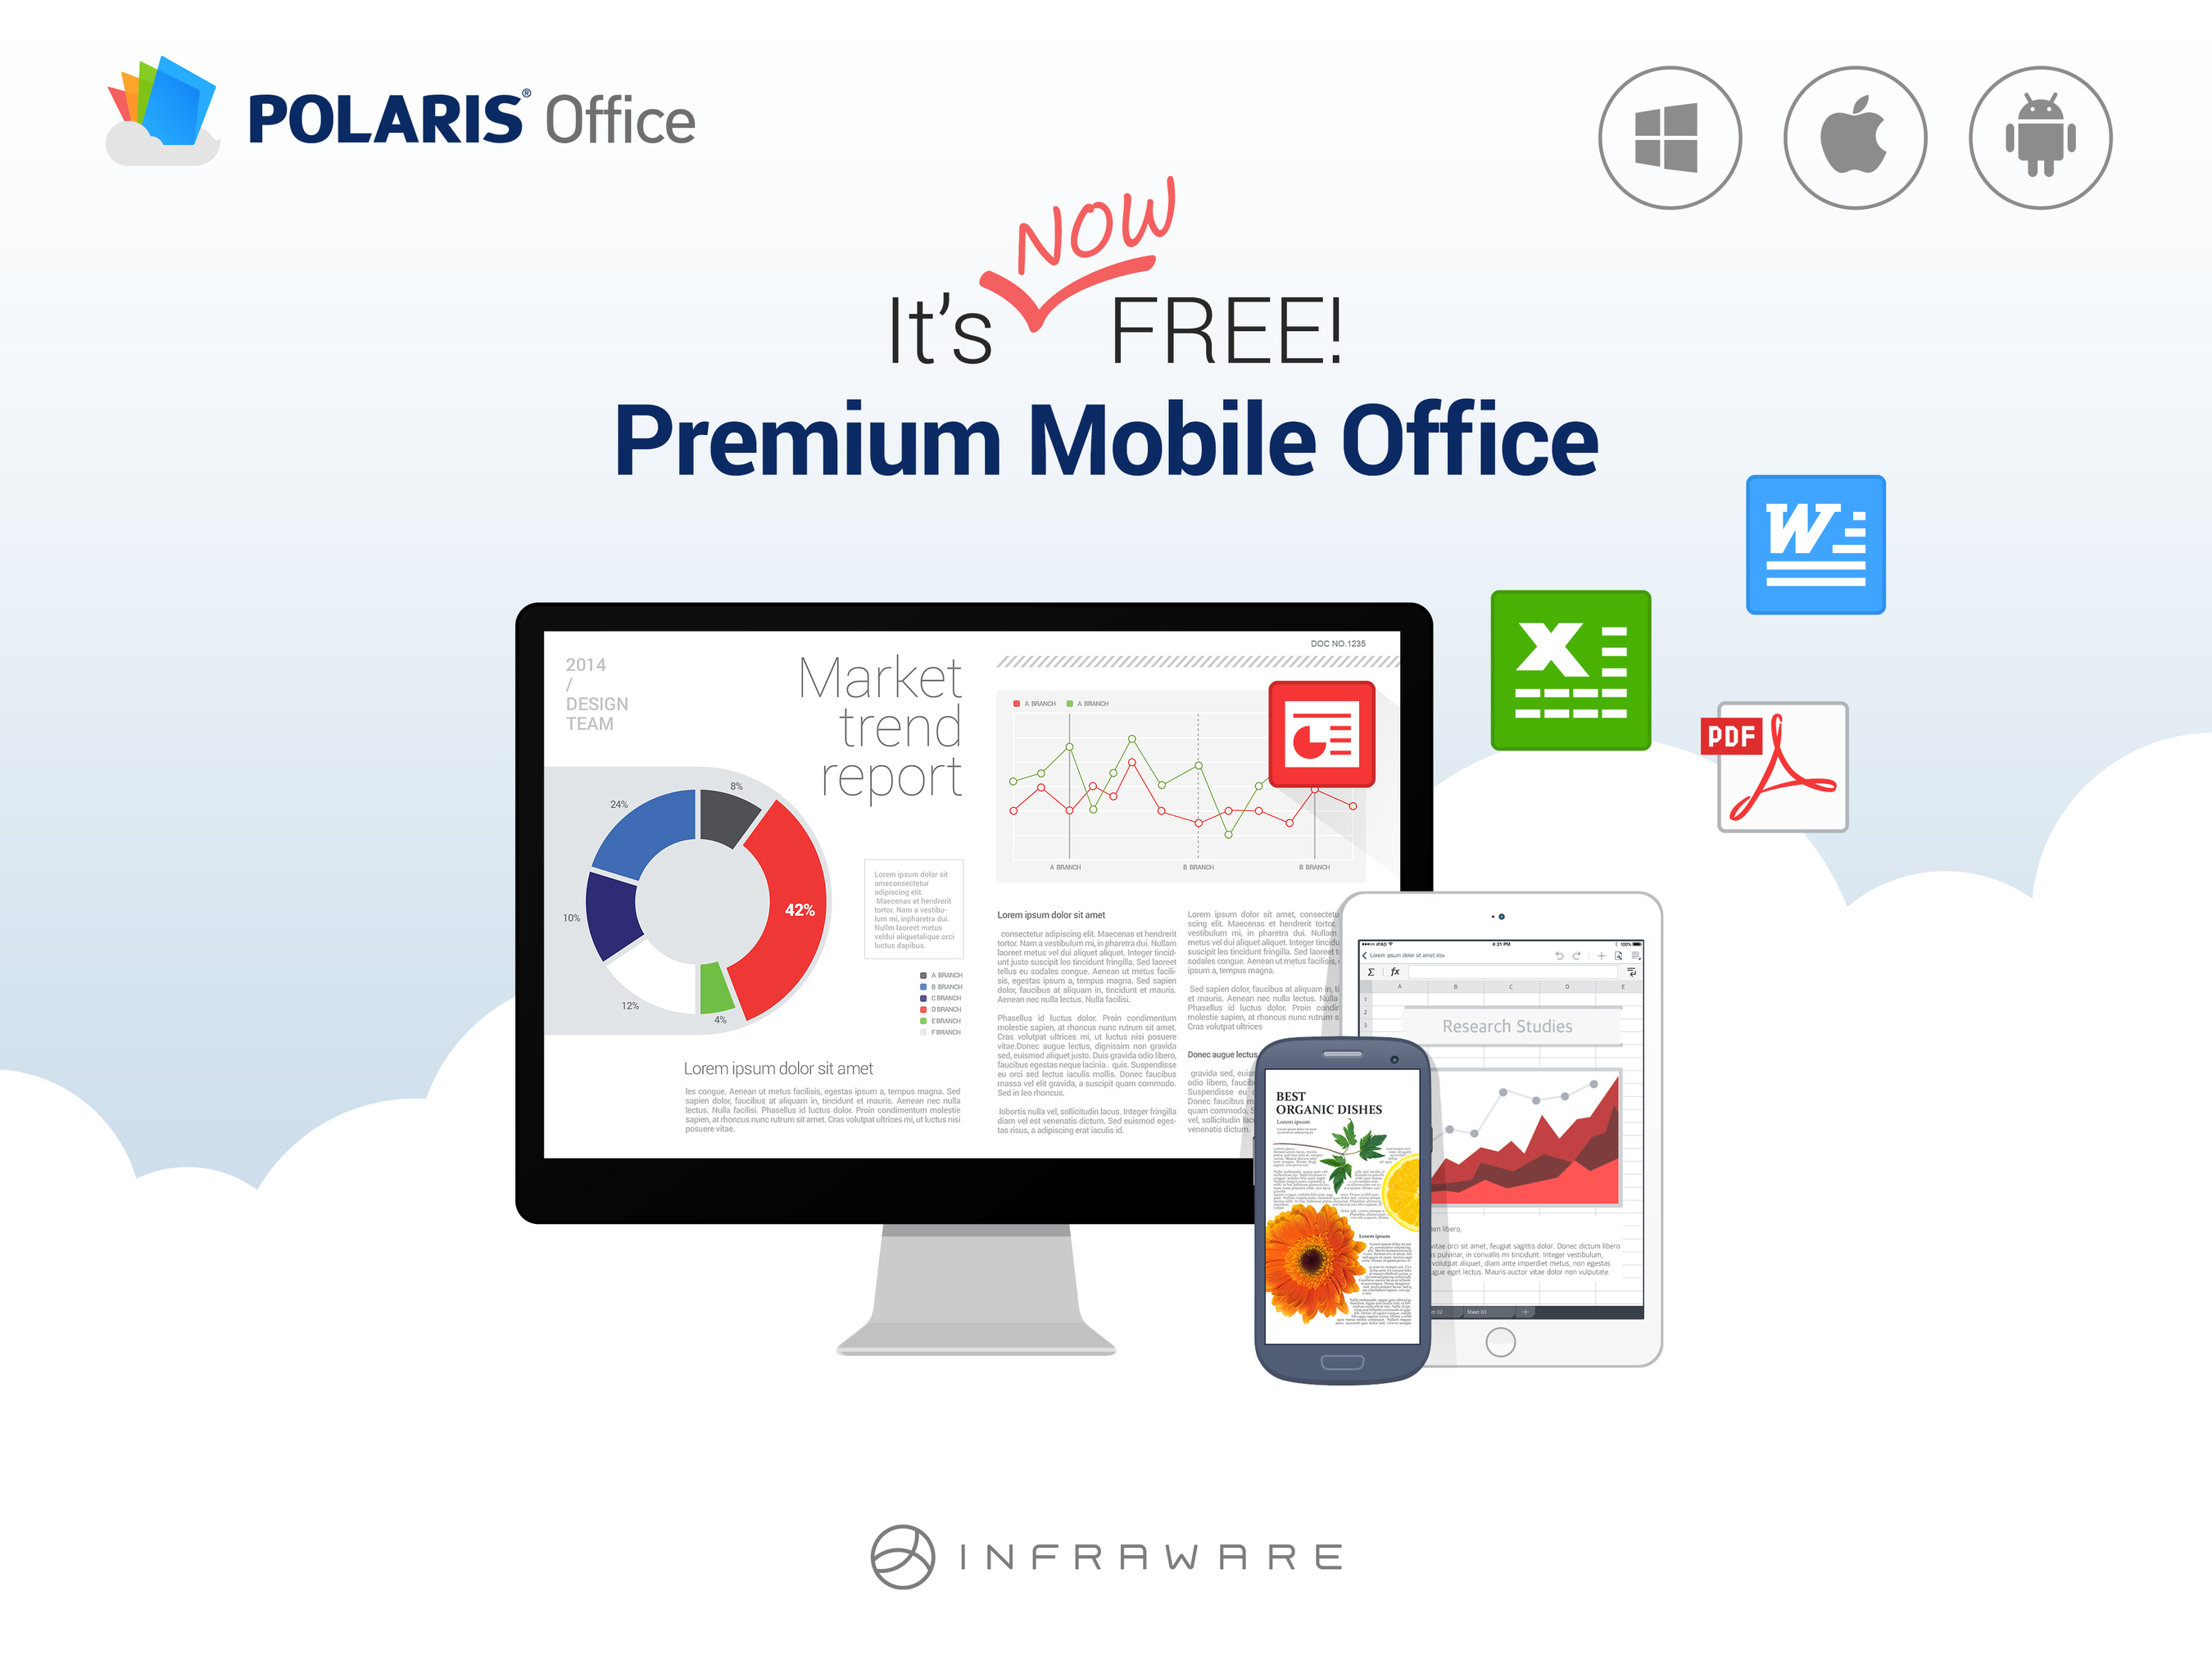 The brand new POLARIS Office is a cloud-based free-of-charge office application available on all mobile devices. POLARIS Office can be used from anywhere at anytime. (PRNewsFoto/INFRAWARE)